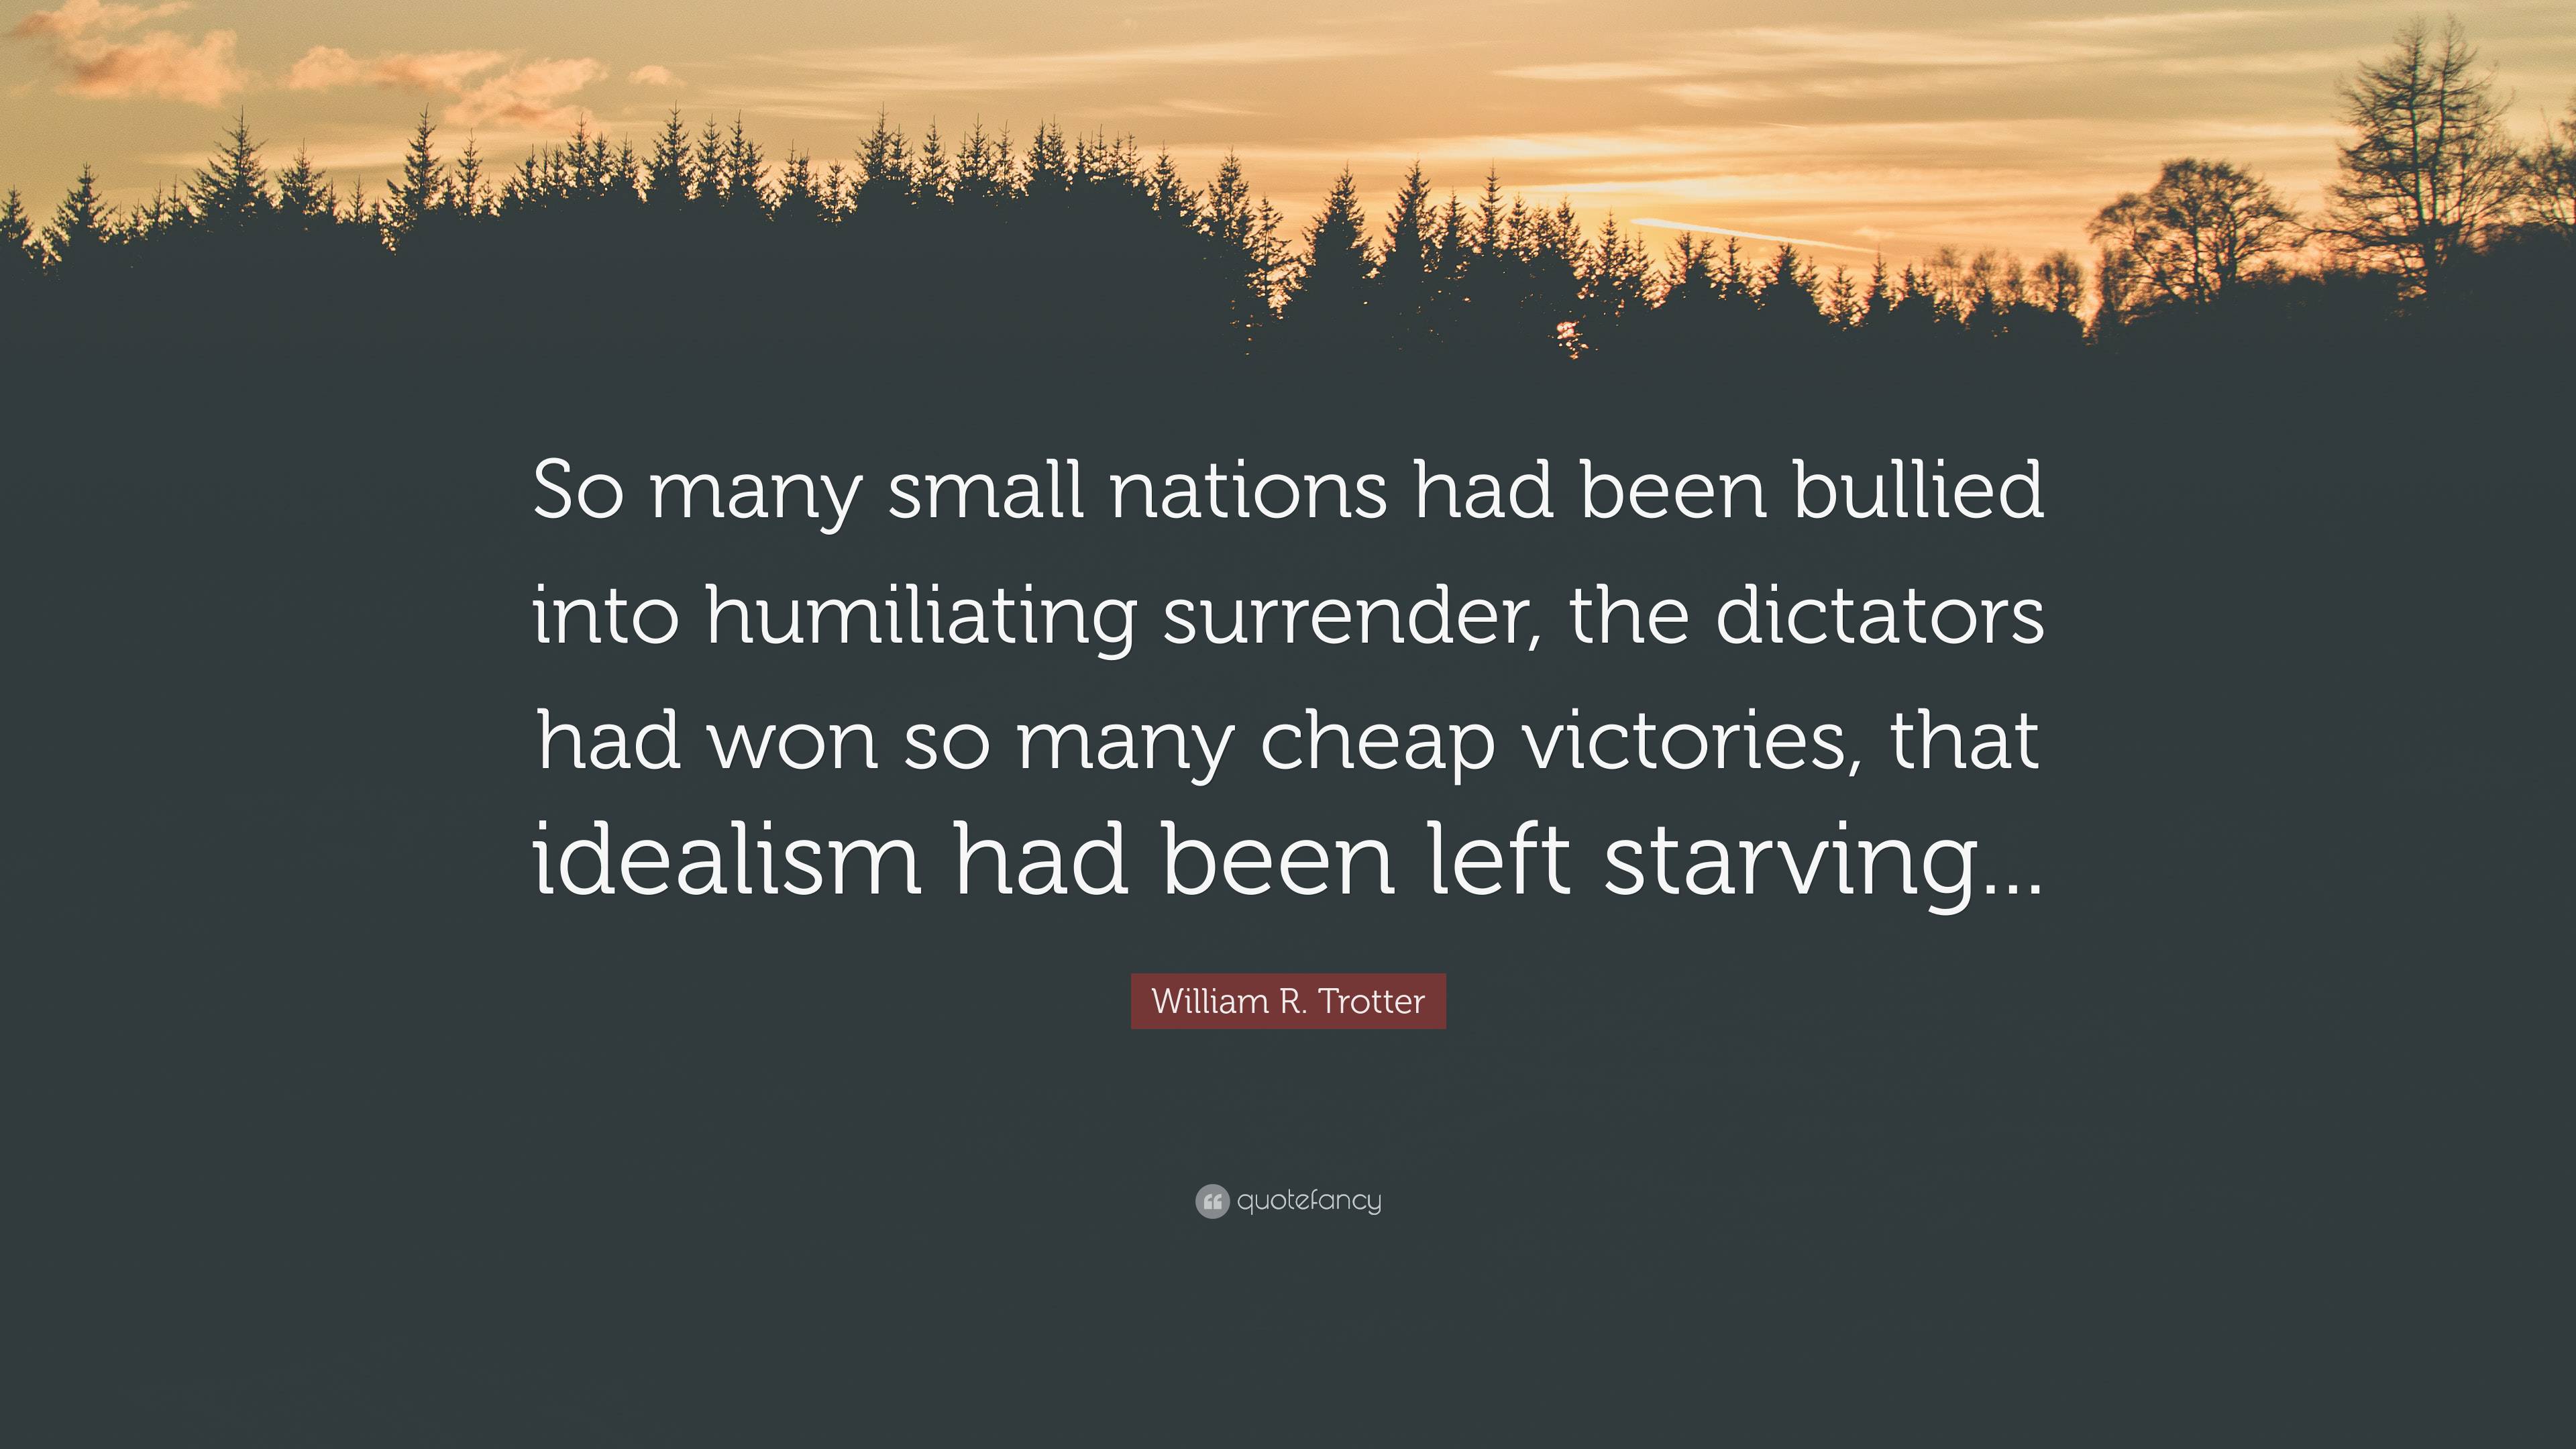 William R. Trotter Quote: “So many small nations had been bullied into ...